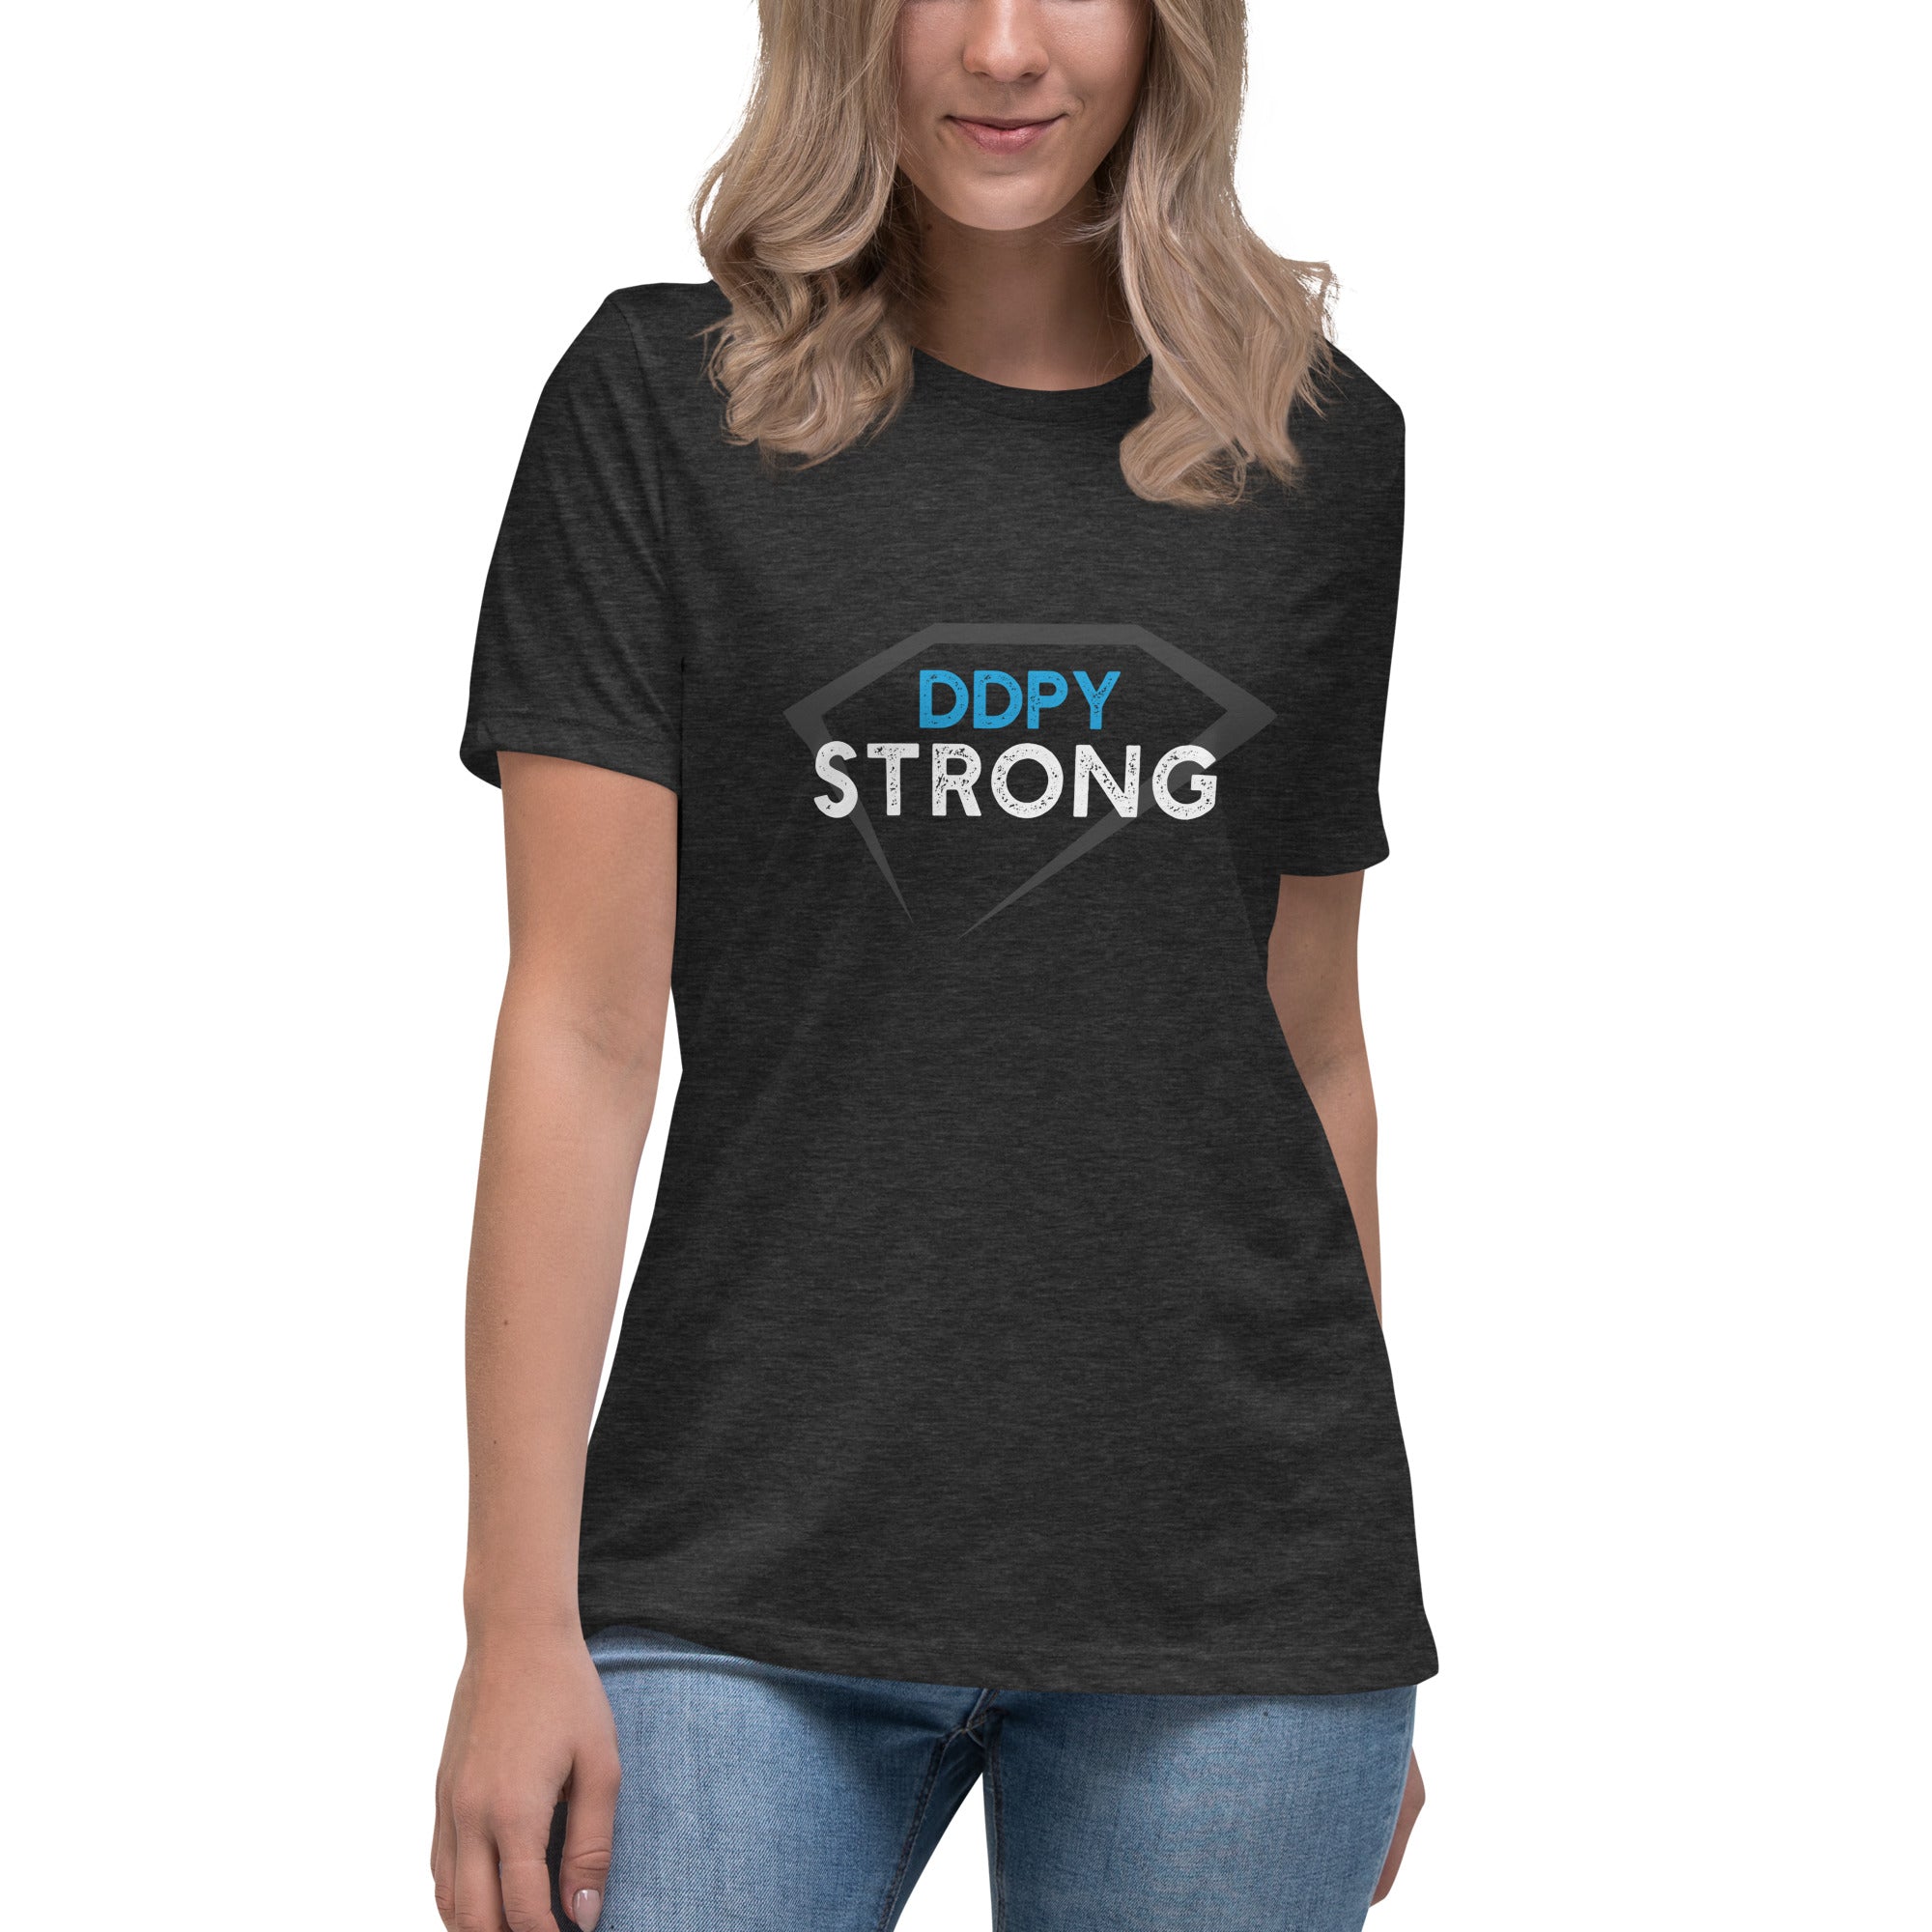 DDPY Strong Women's Relaxed T-Shirt (On Demand Printing)